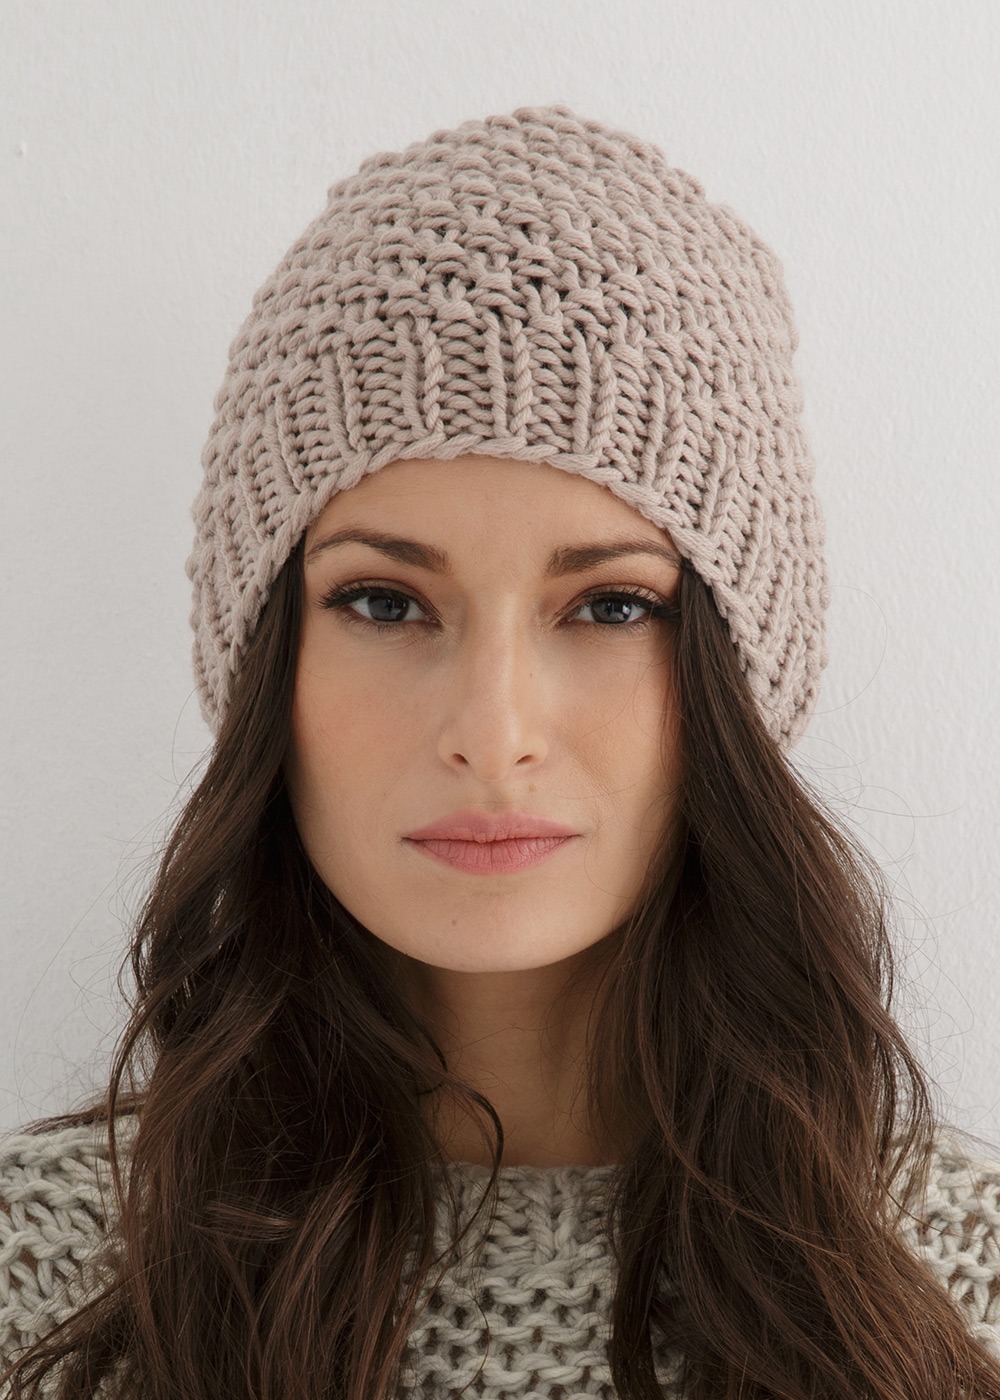 An easy ribbed beanie knit pattern – Through the Stitch